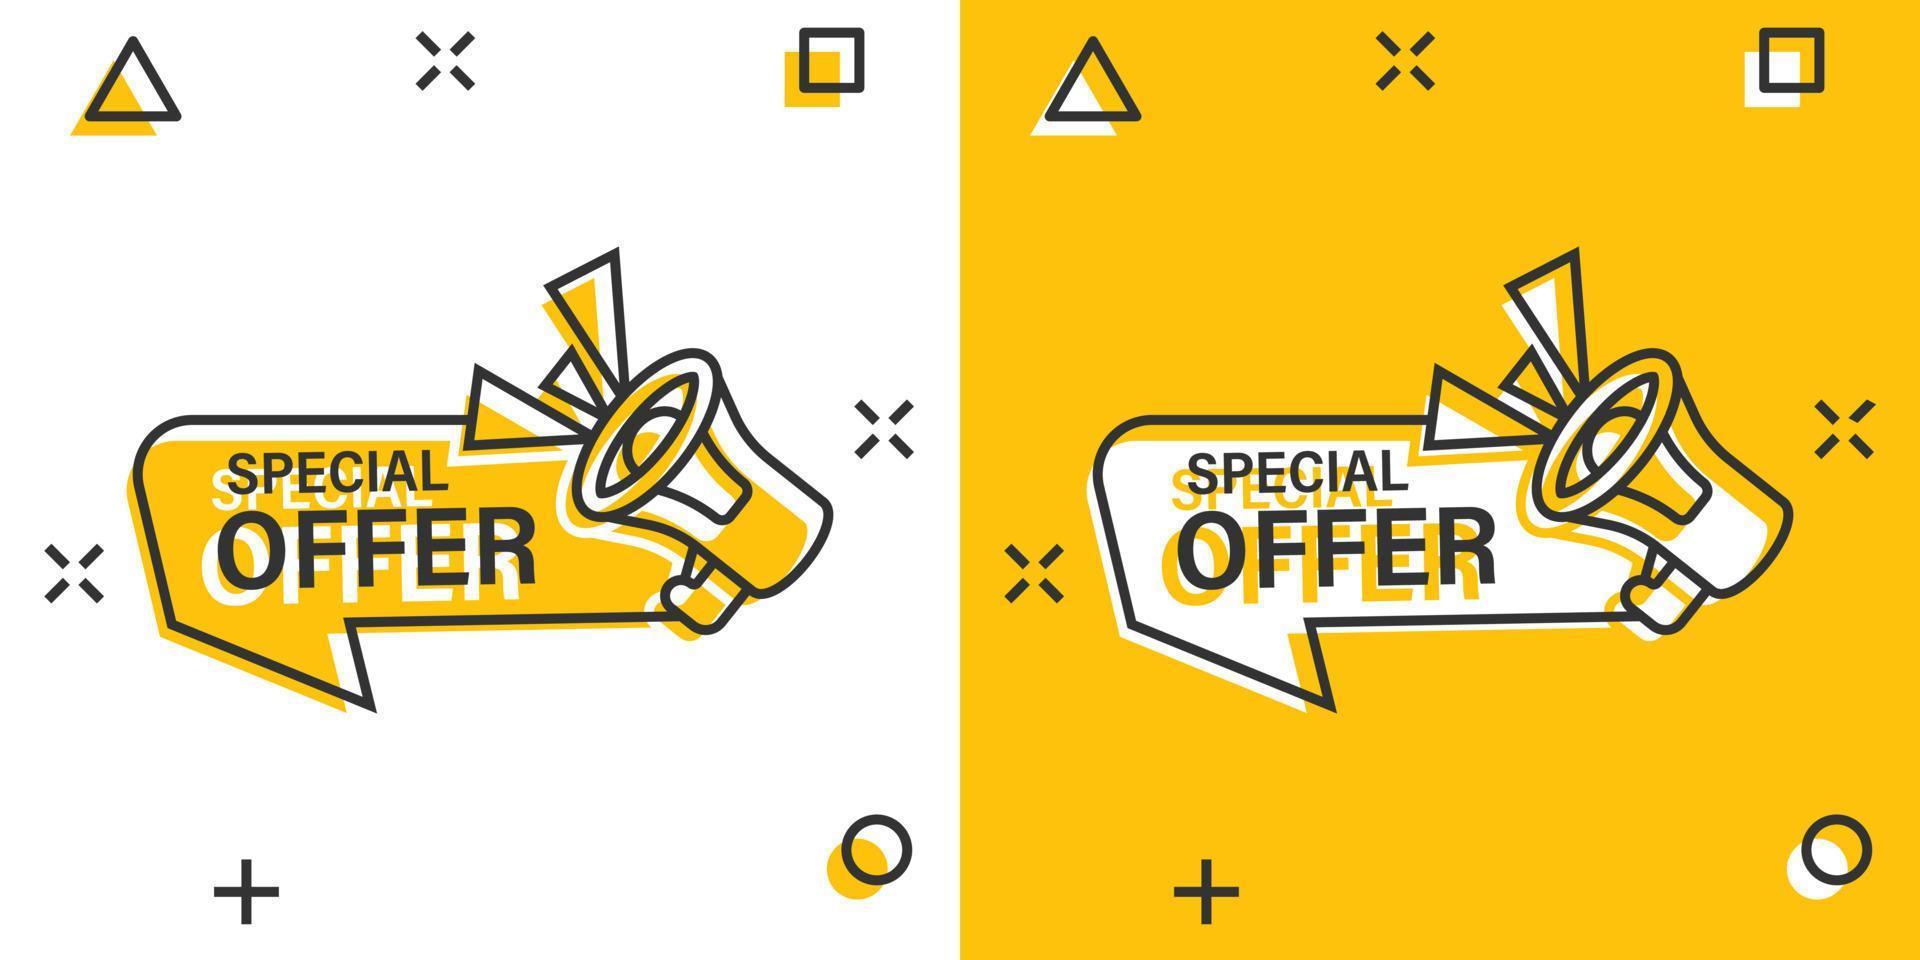 Special offer label icon in comic style. Megaphone with discount cartoon vector illustration on isolated background. Sale splash effect sign business concept.